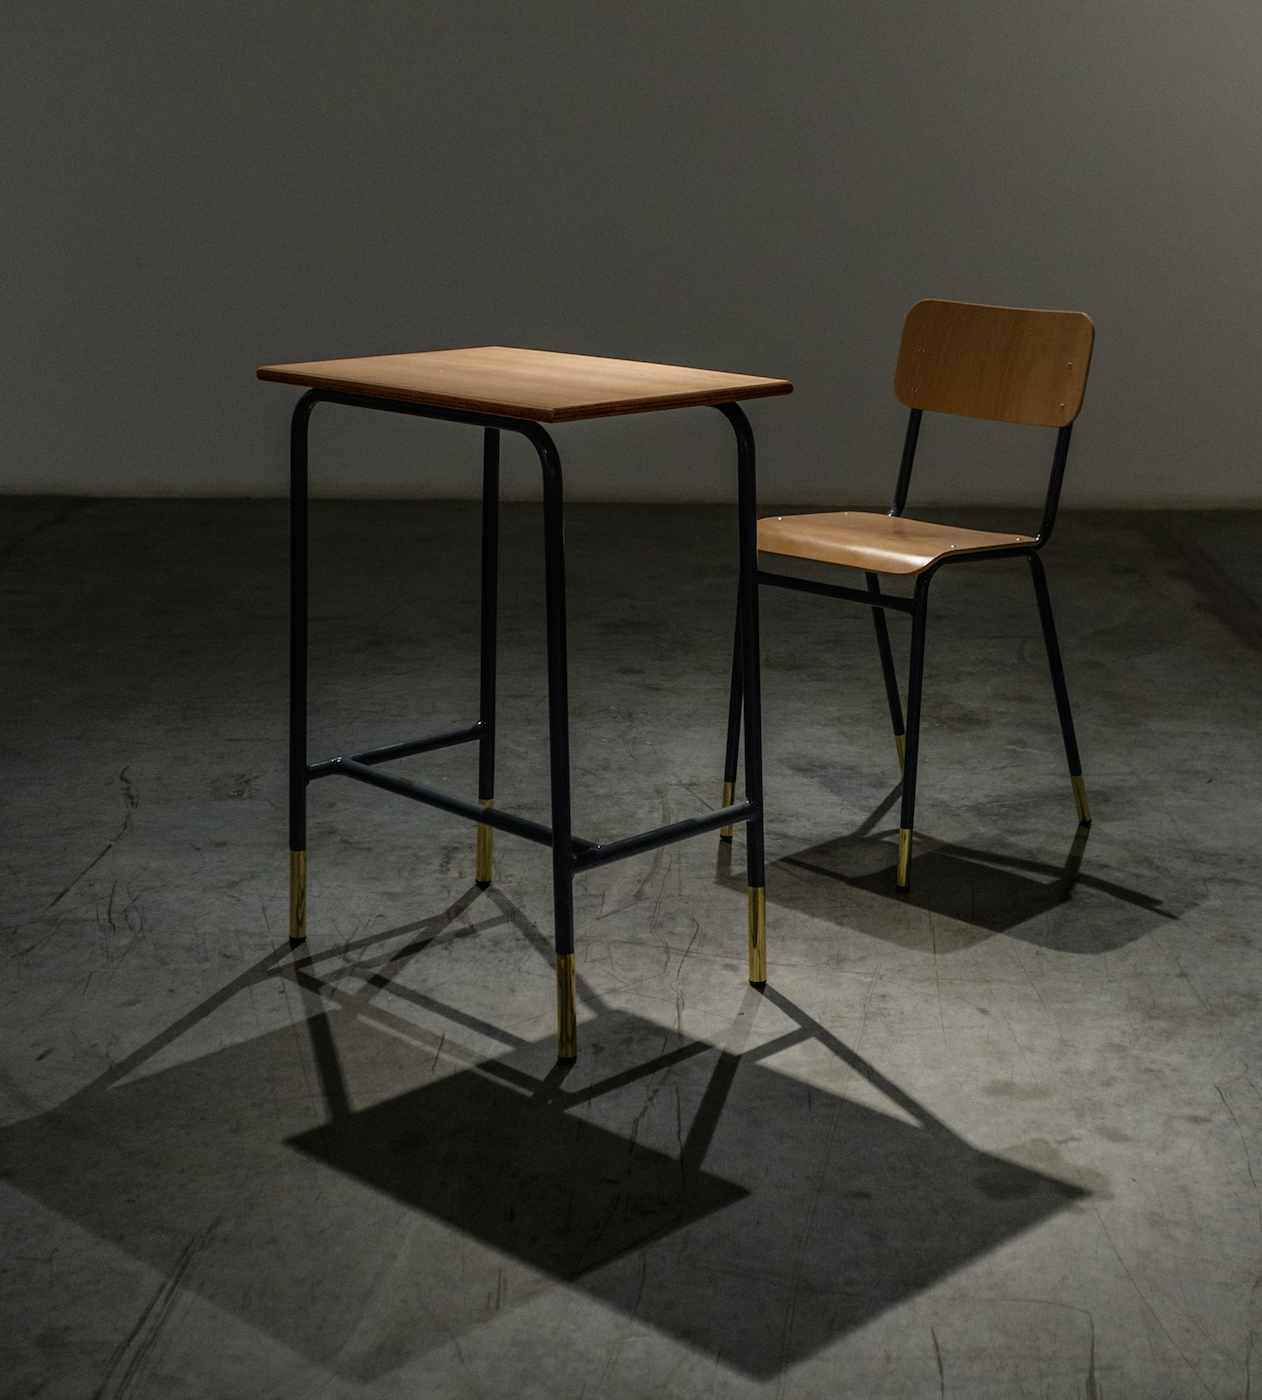  The Shape of Distance 2016 Pupil table and chair, welded brass Table: 77 x 40 x 55 cm, chair: 80 x 45 x 36 cm 